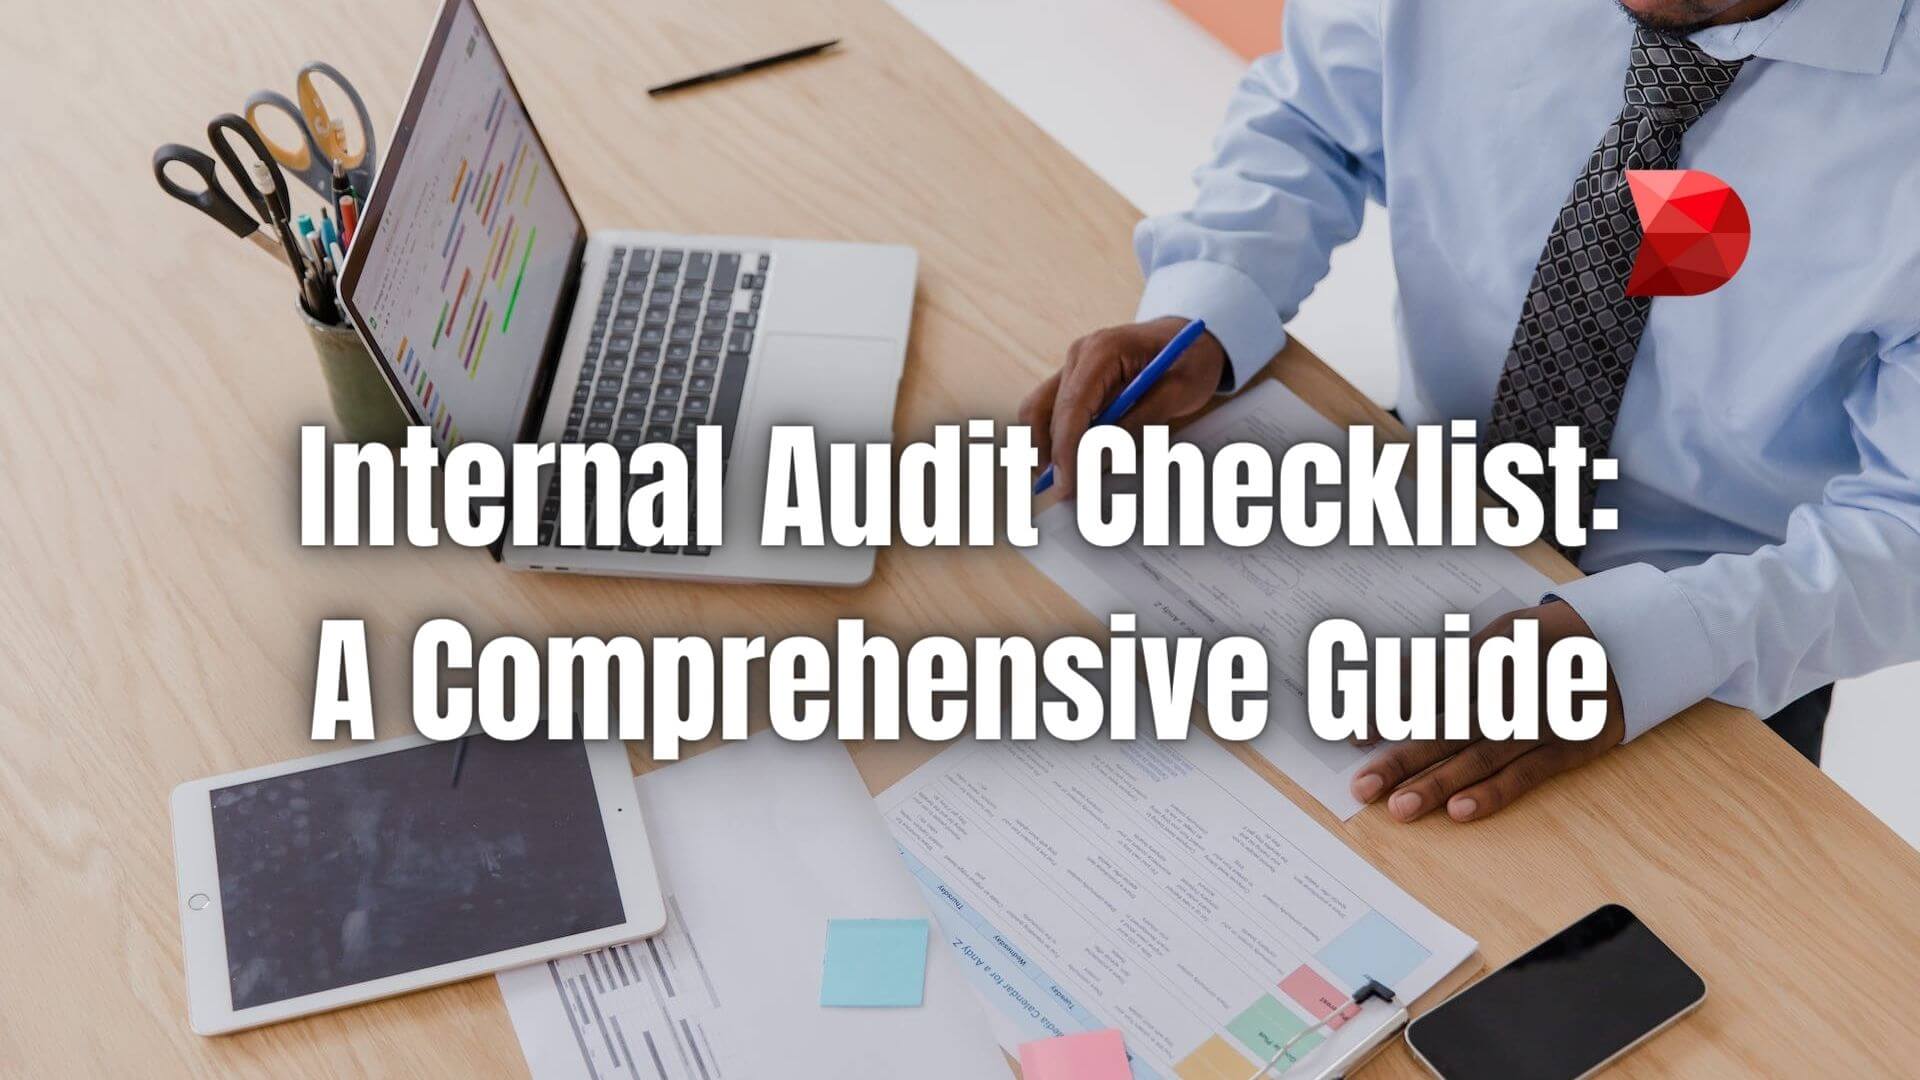 Streamline your audits with this expert internal audit checklist guide. Click here to ensure compliance and efficiency effortlessly.